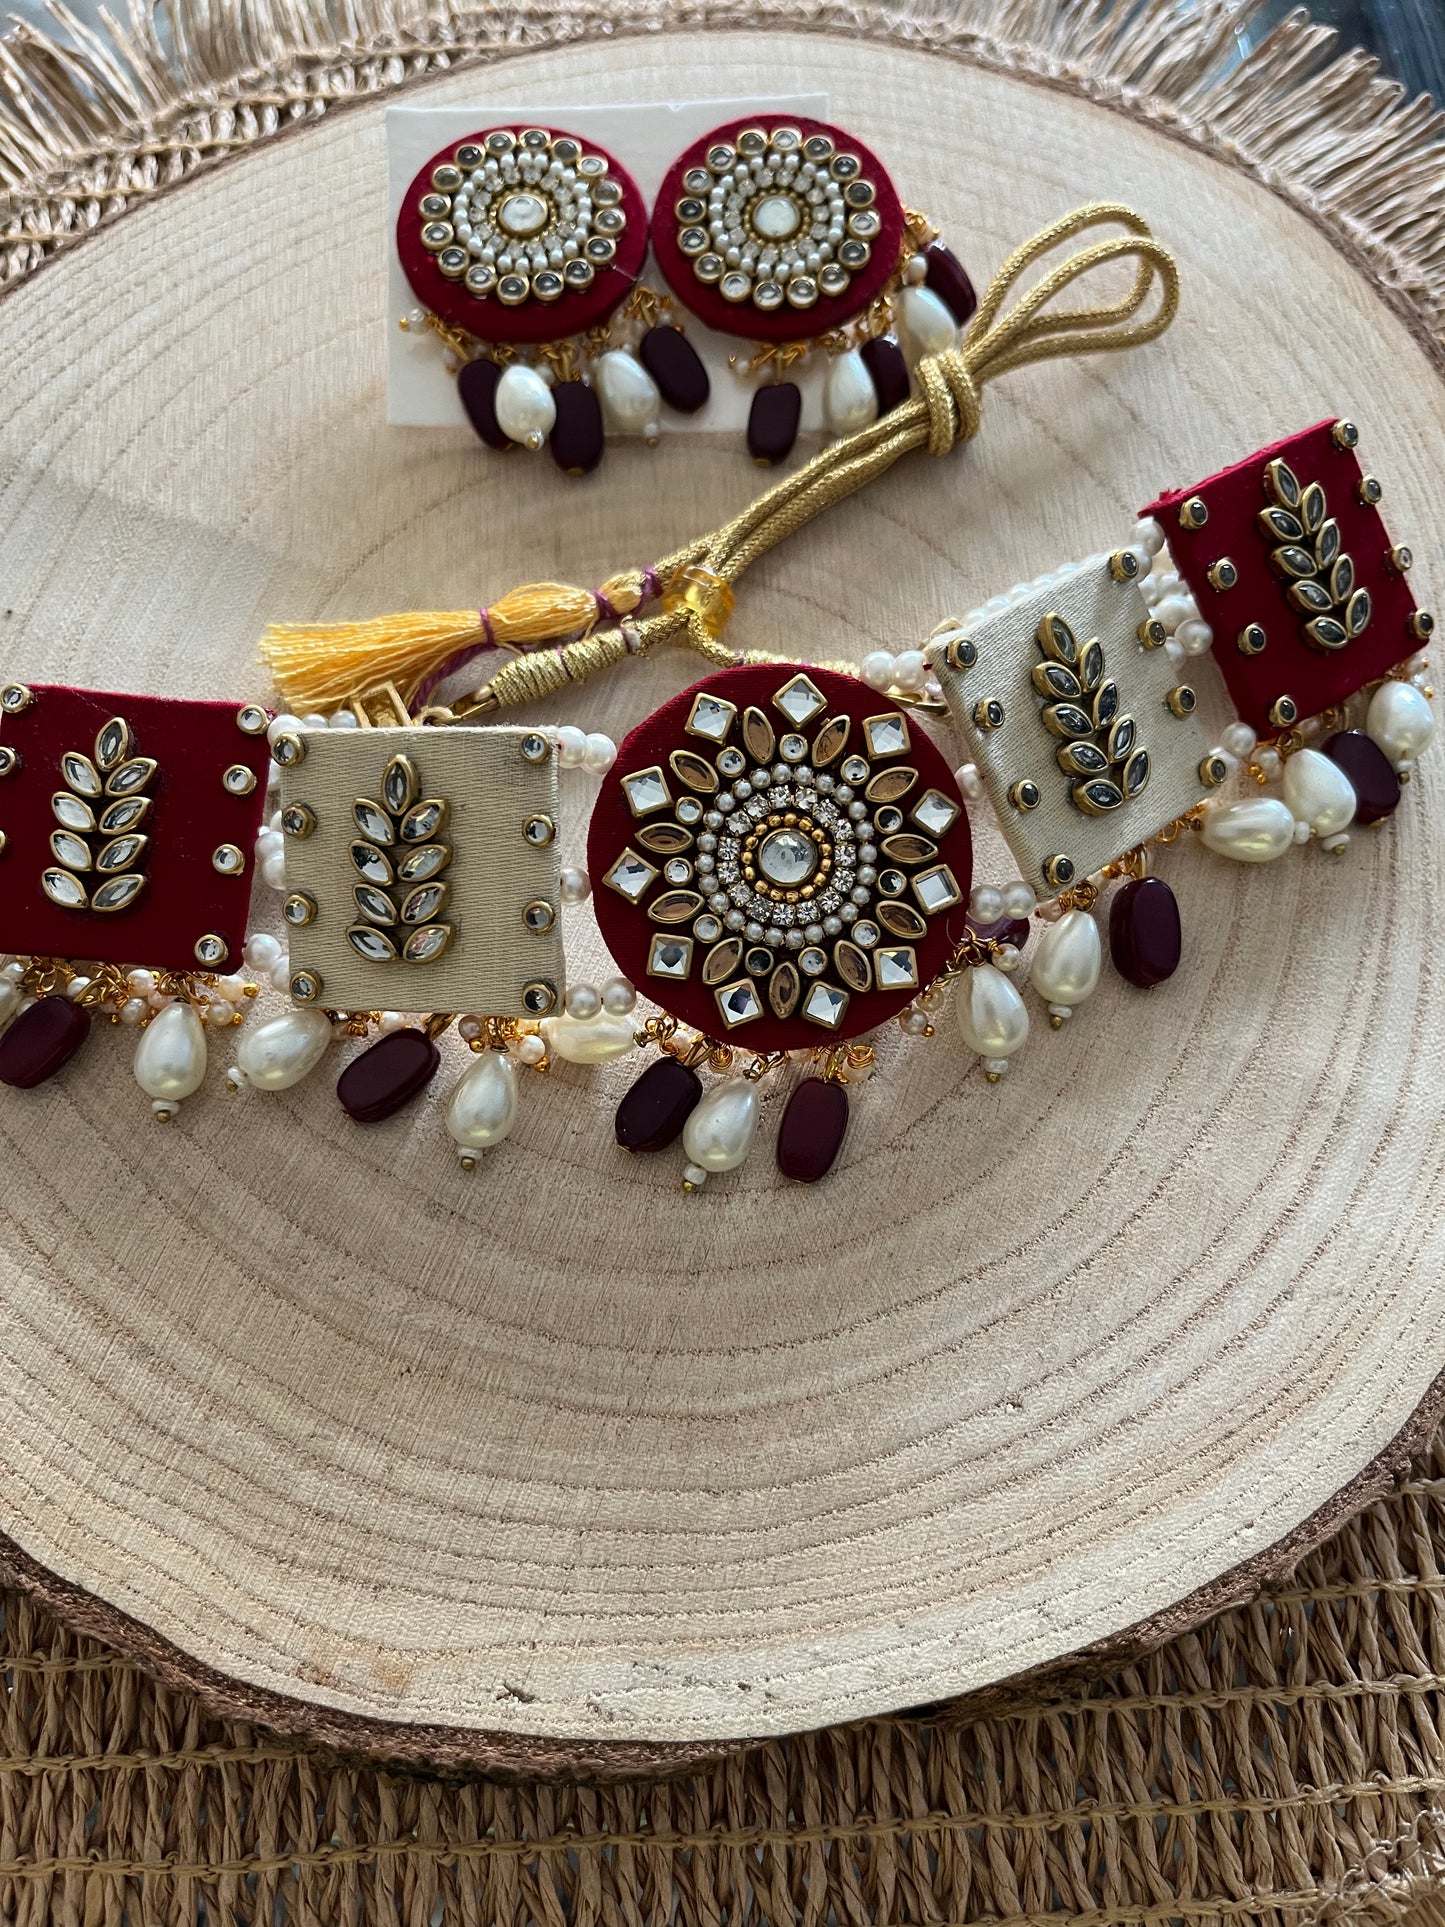 Fabric choker set with geometric pieces - red, white